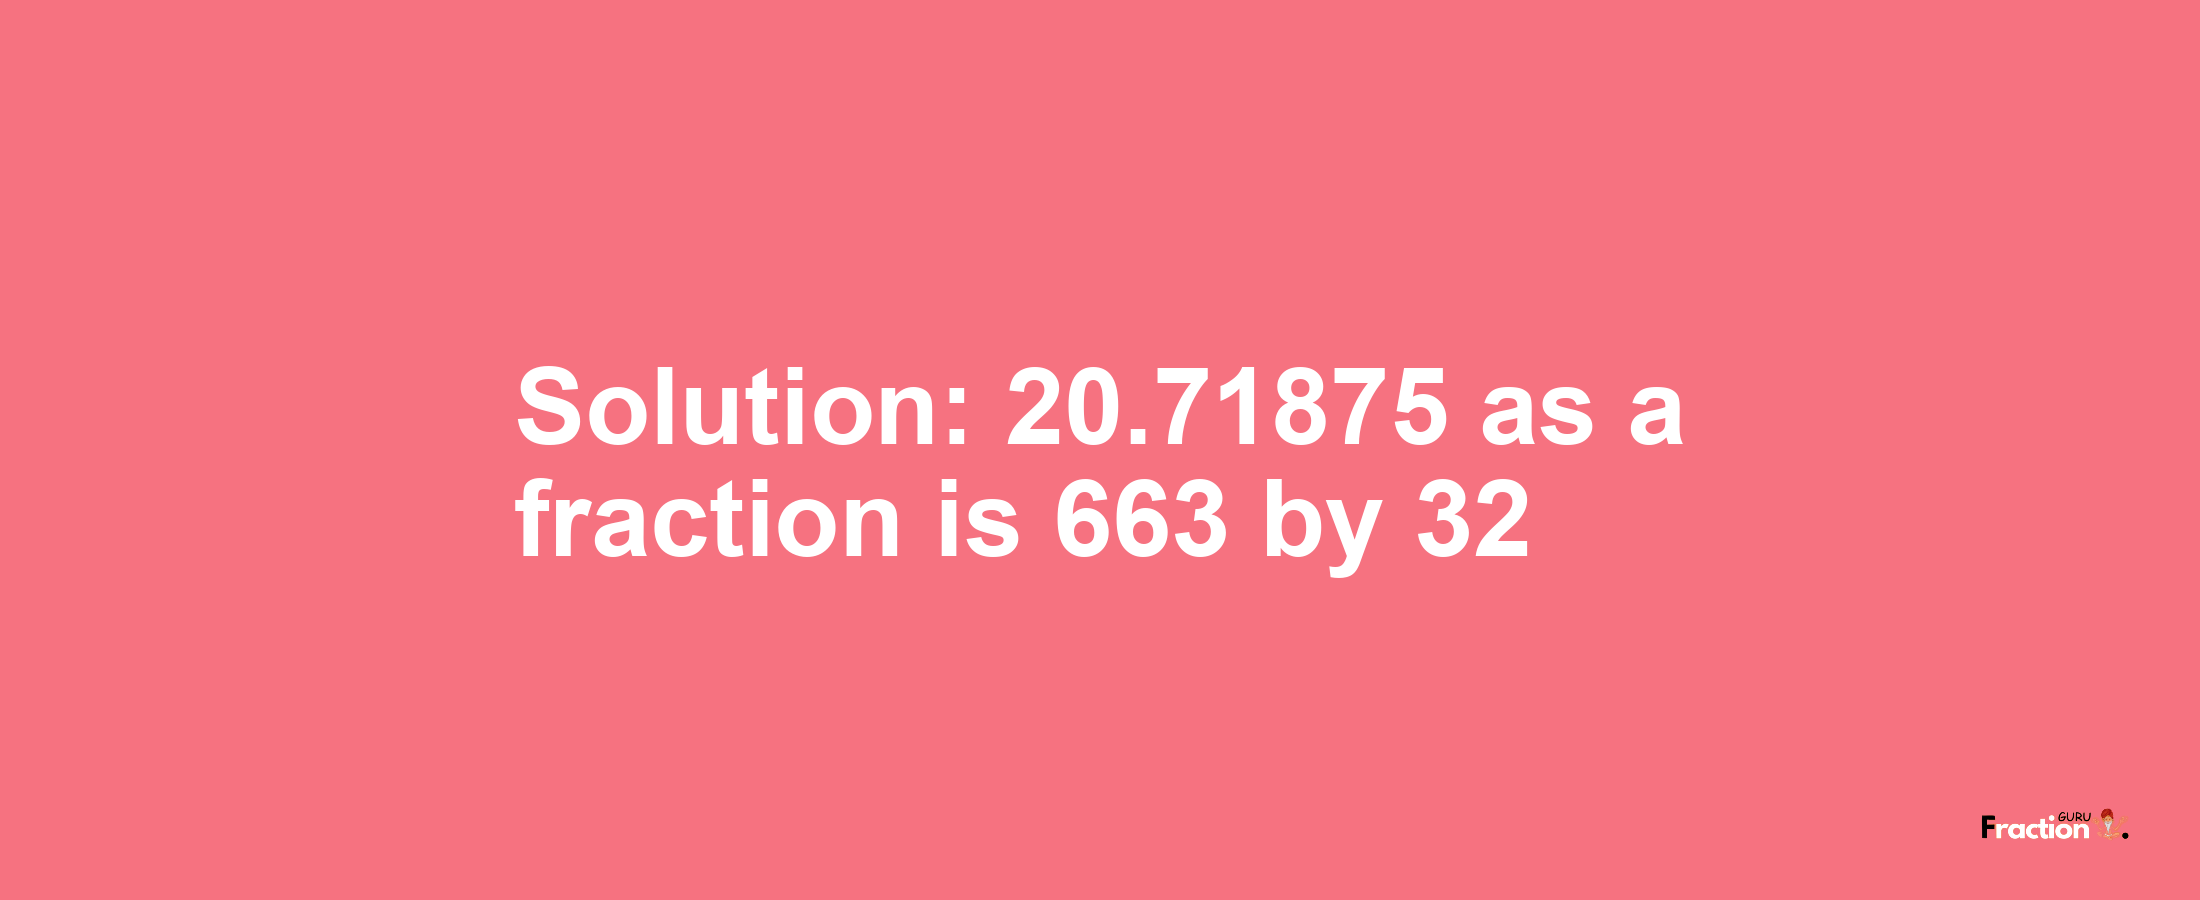 Solution:20.71875 as a fraction is 663/32